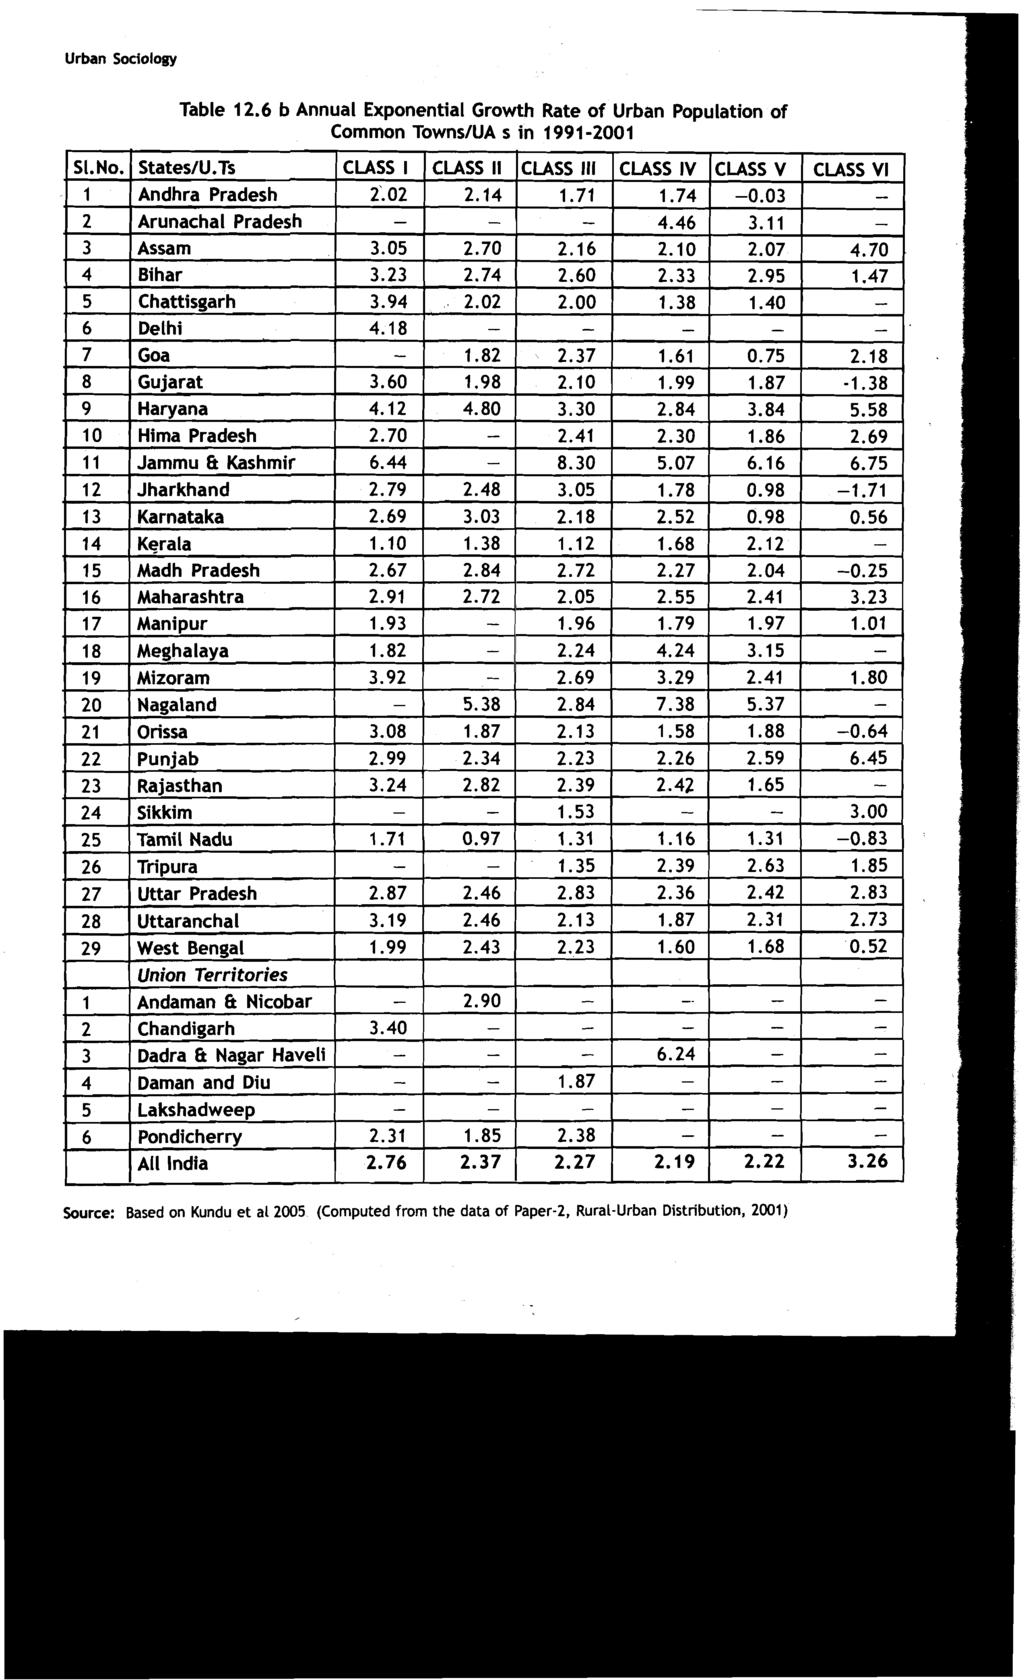 1.35 Urban Sociology Table 12.6 b Annual Exponential Growth Rate of Urban Population of Common TownsIUA s in 1991-2001 Sl.No. States1U.